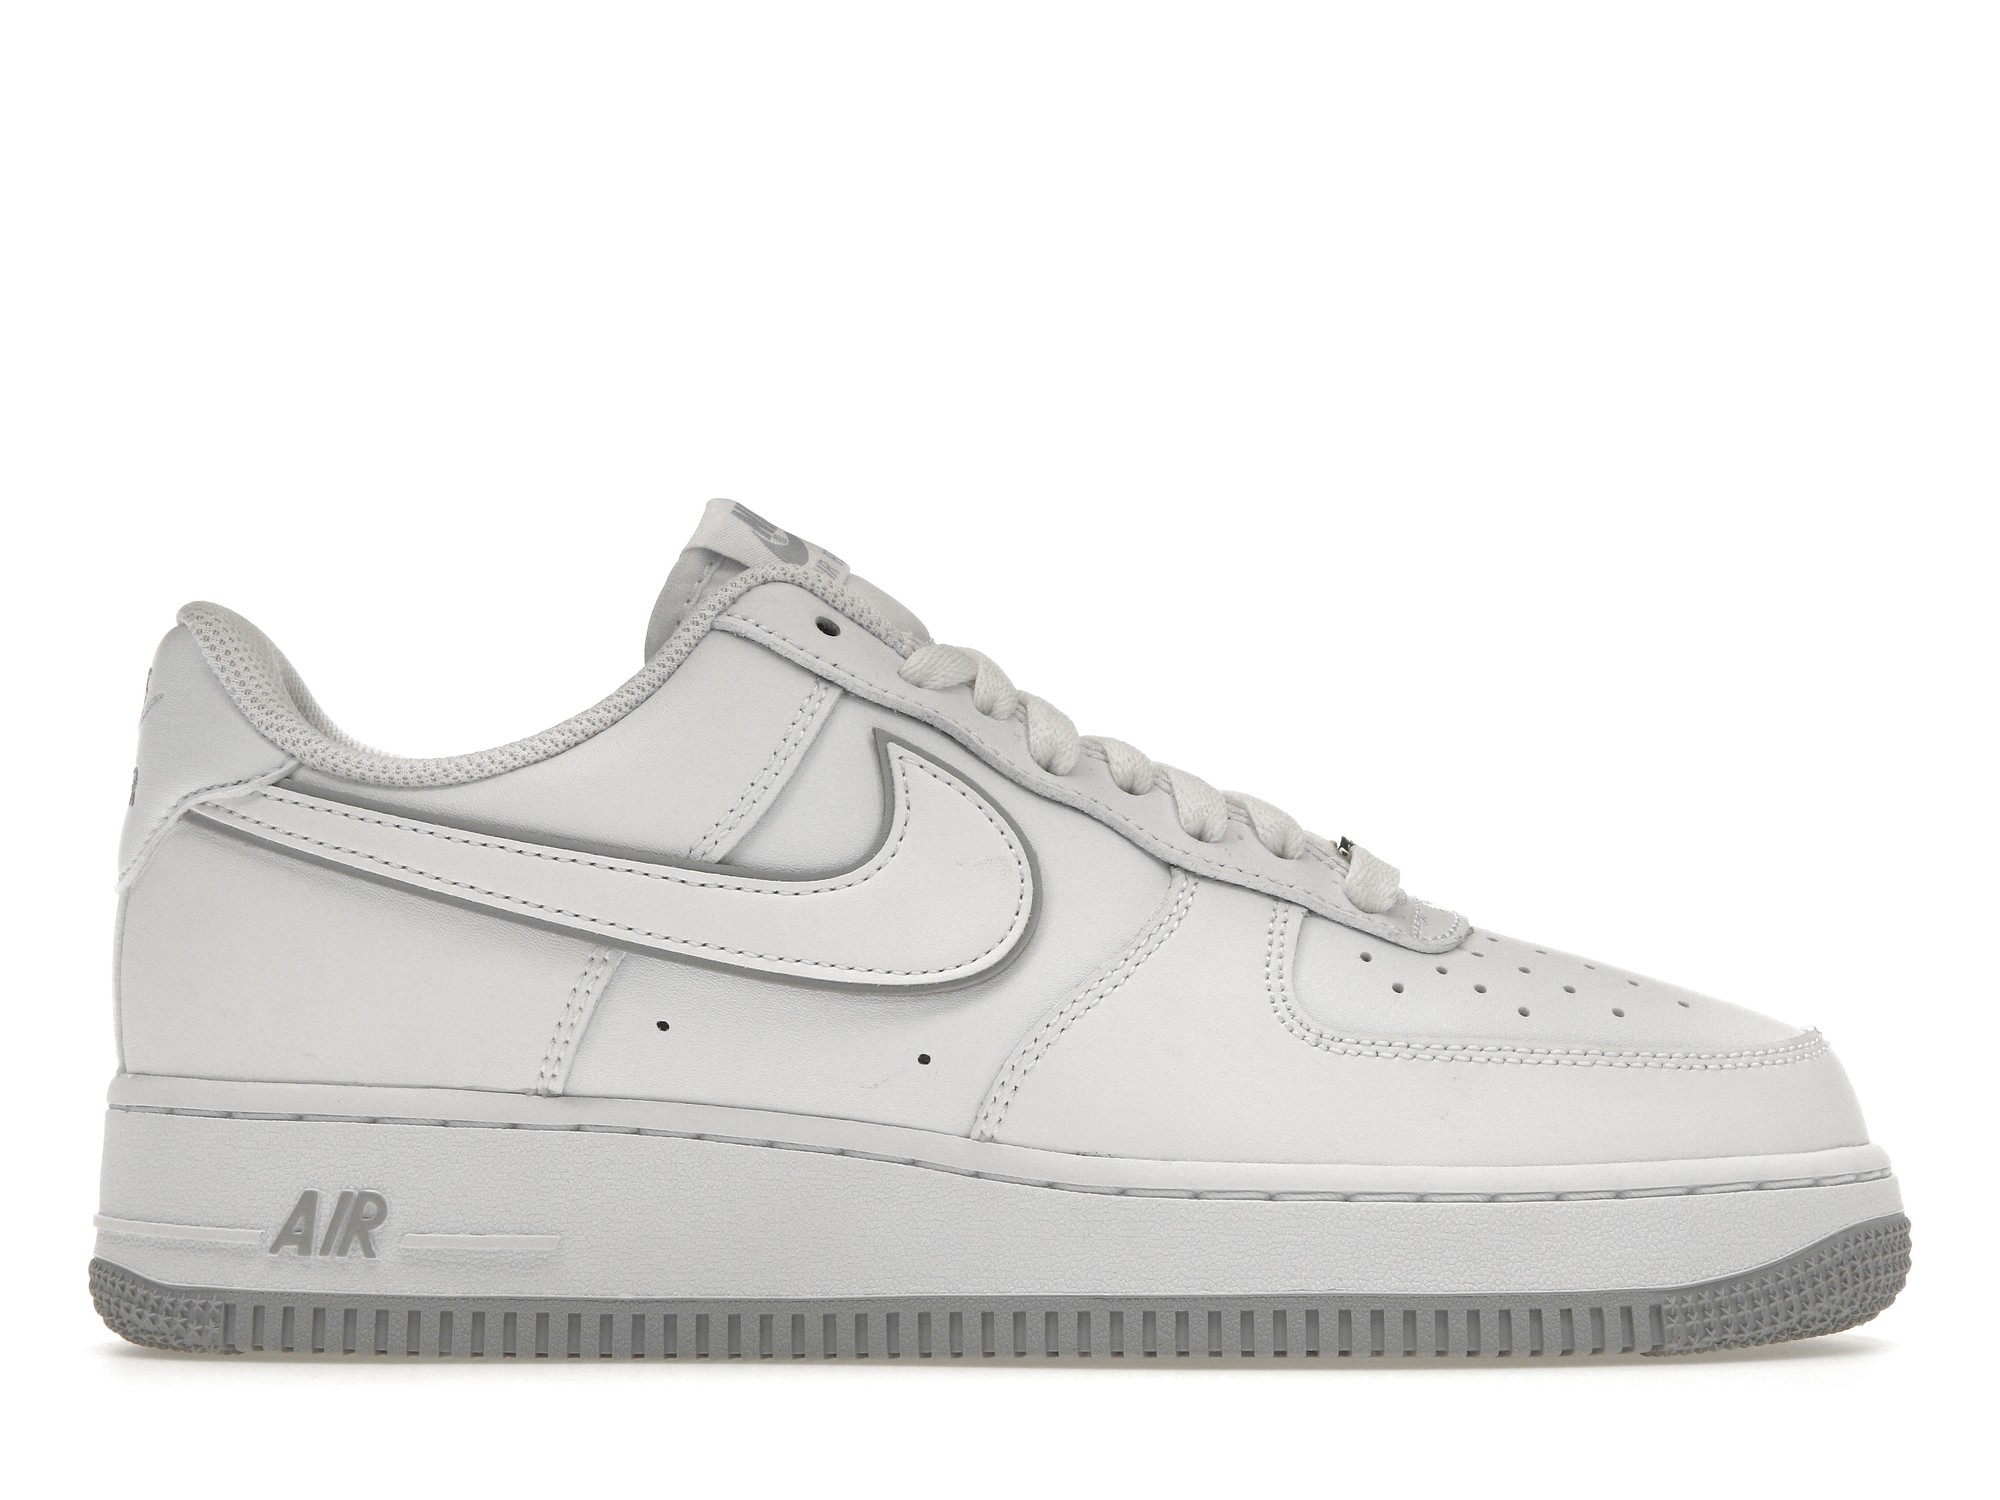 Nike Air Force 1 '07 Low White Wolf Grey Sole Men's - DV0788-100 - US